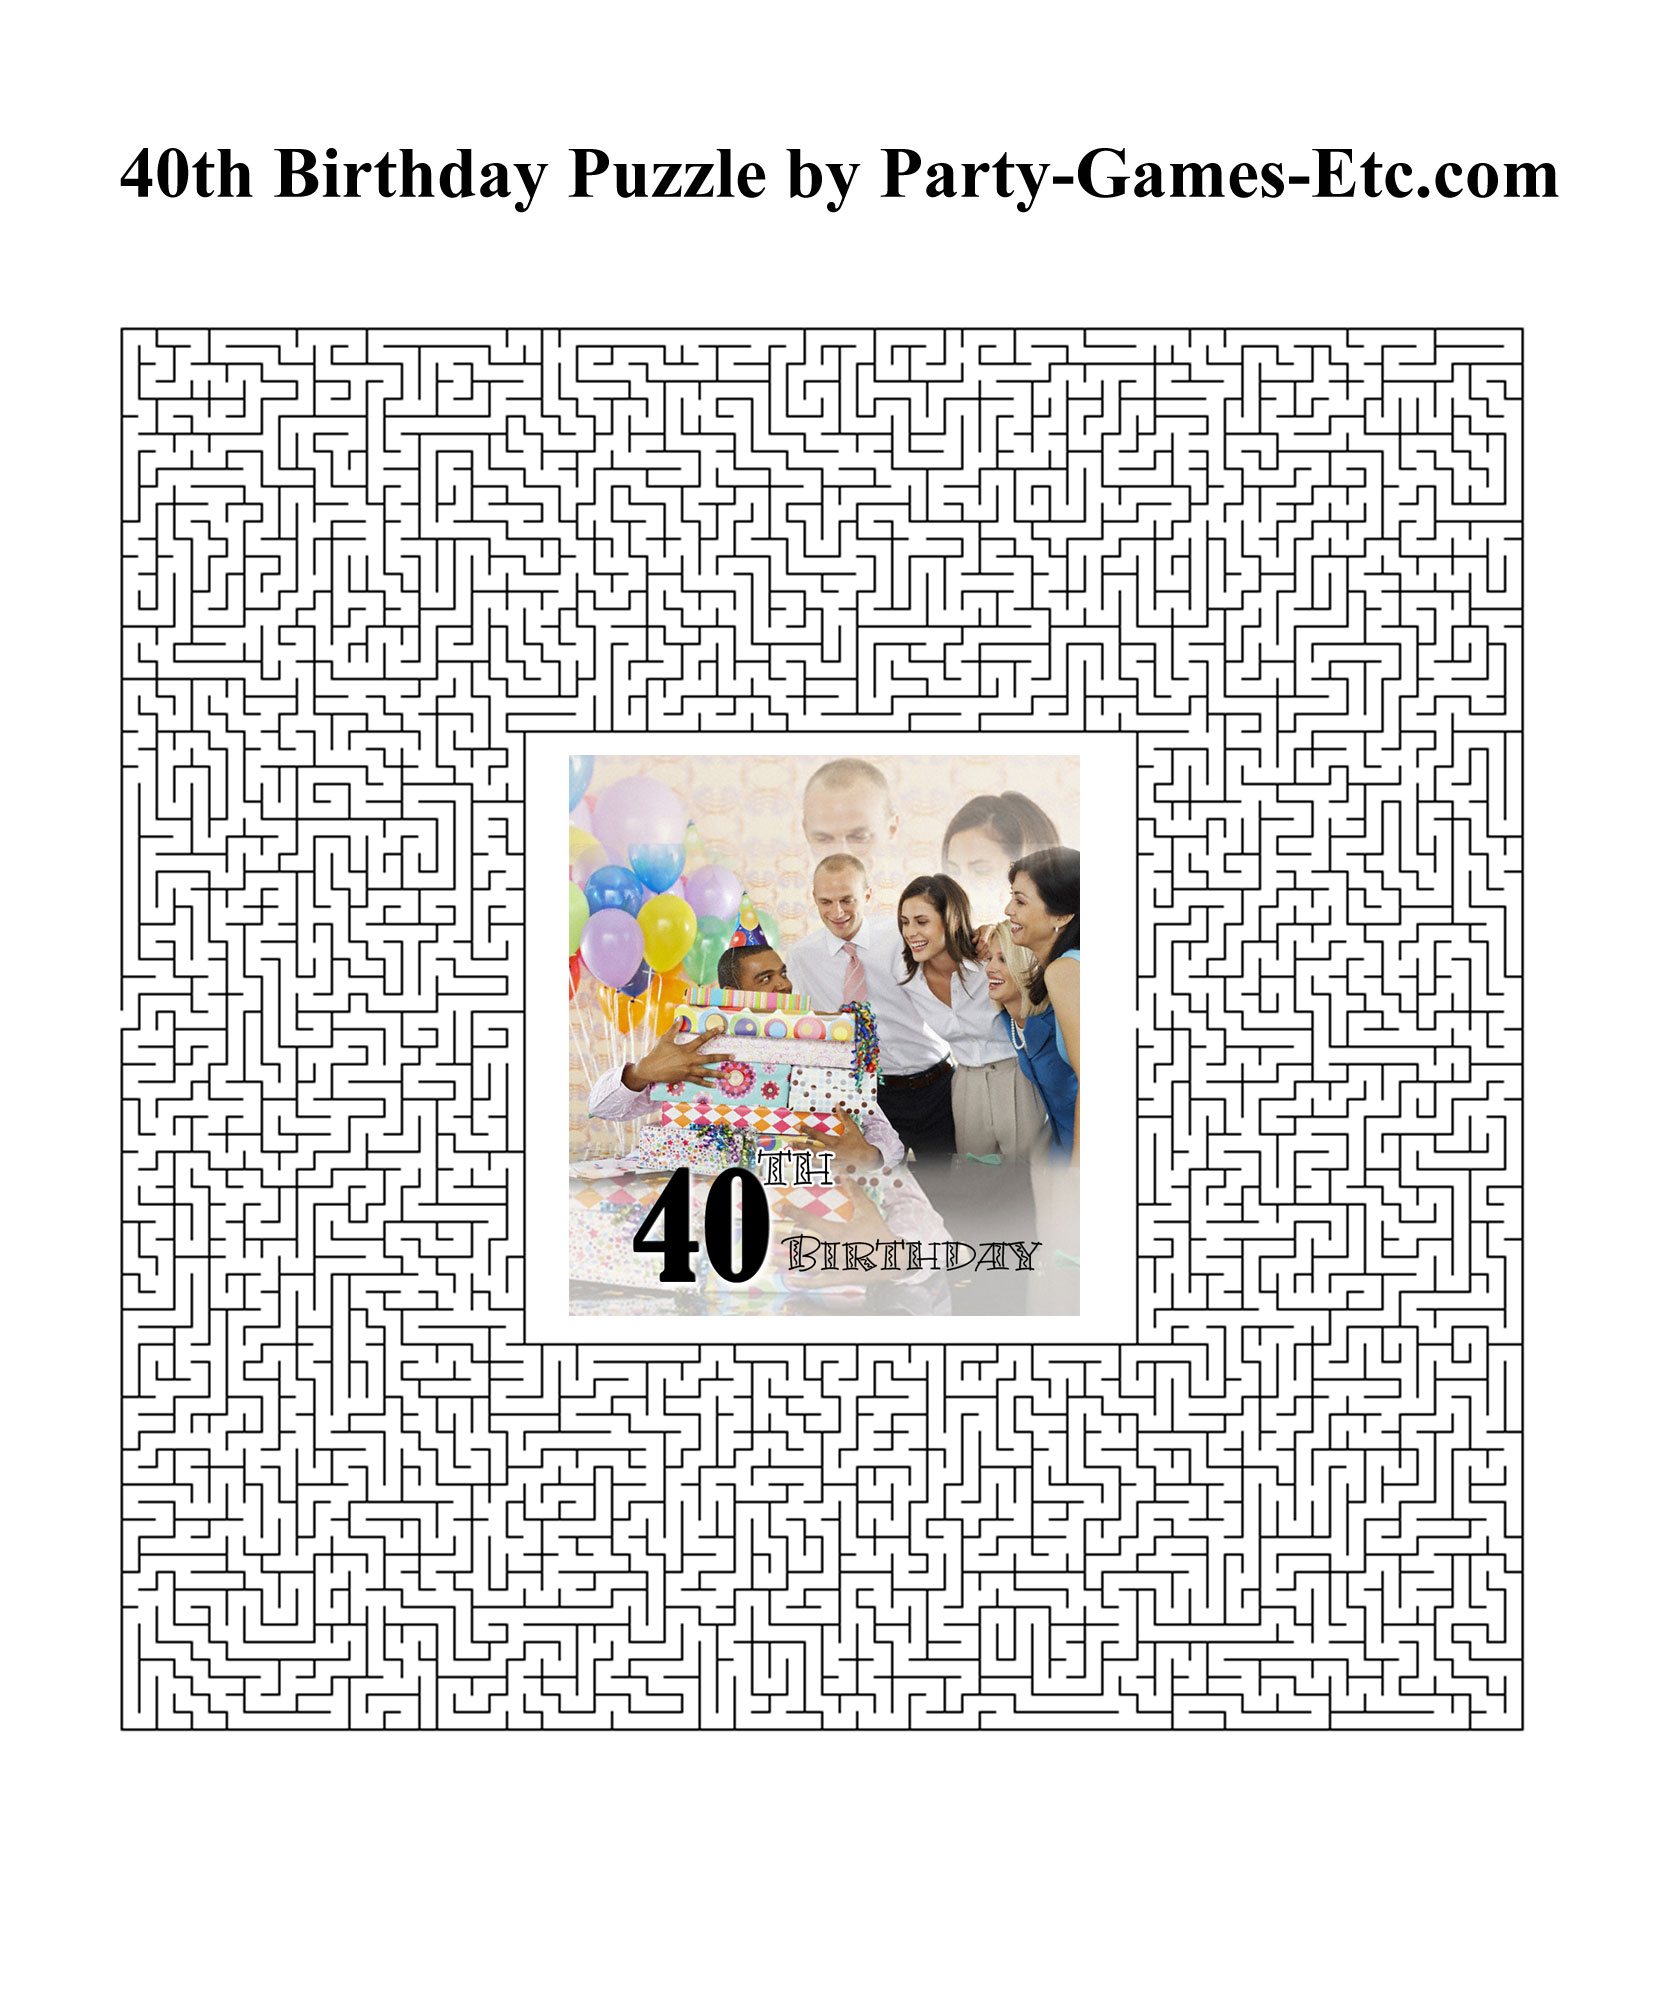 40th Birthday Party Games Free Printable Games And Activities For A 